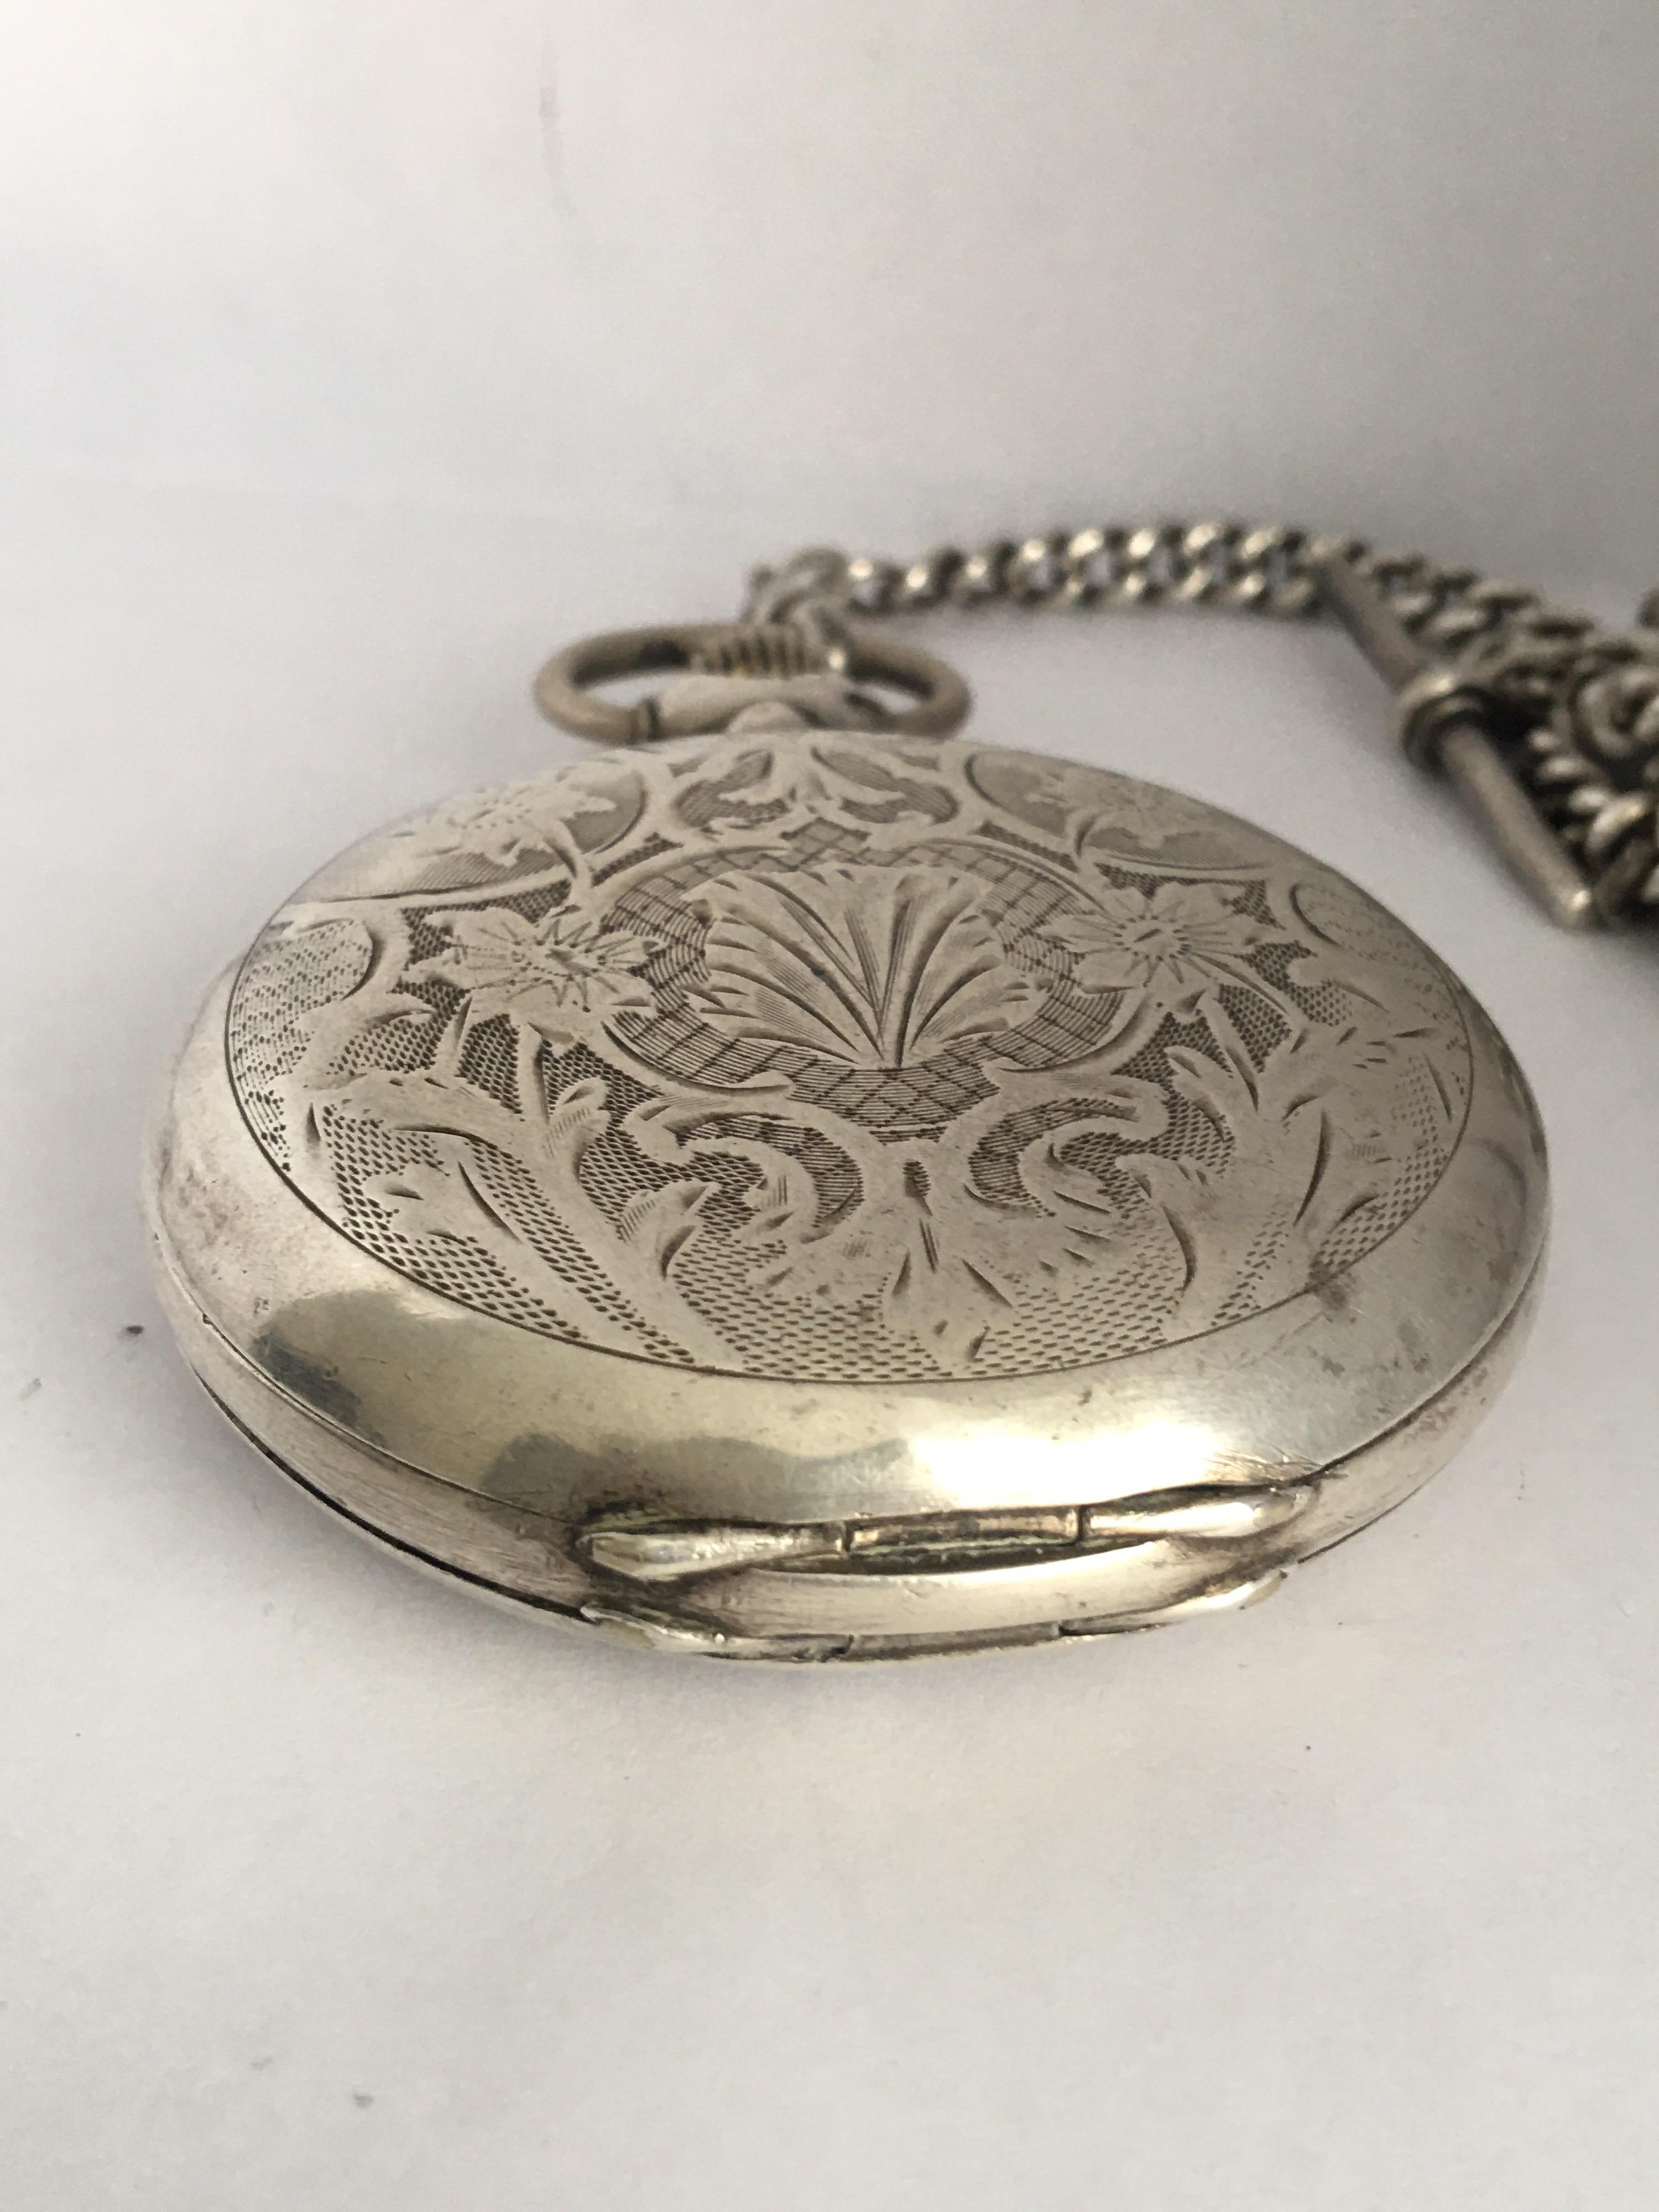 Antique Full Hunter Engraved Silver Pocket Watch Signed Udovic Watch Co. 6